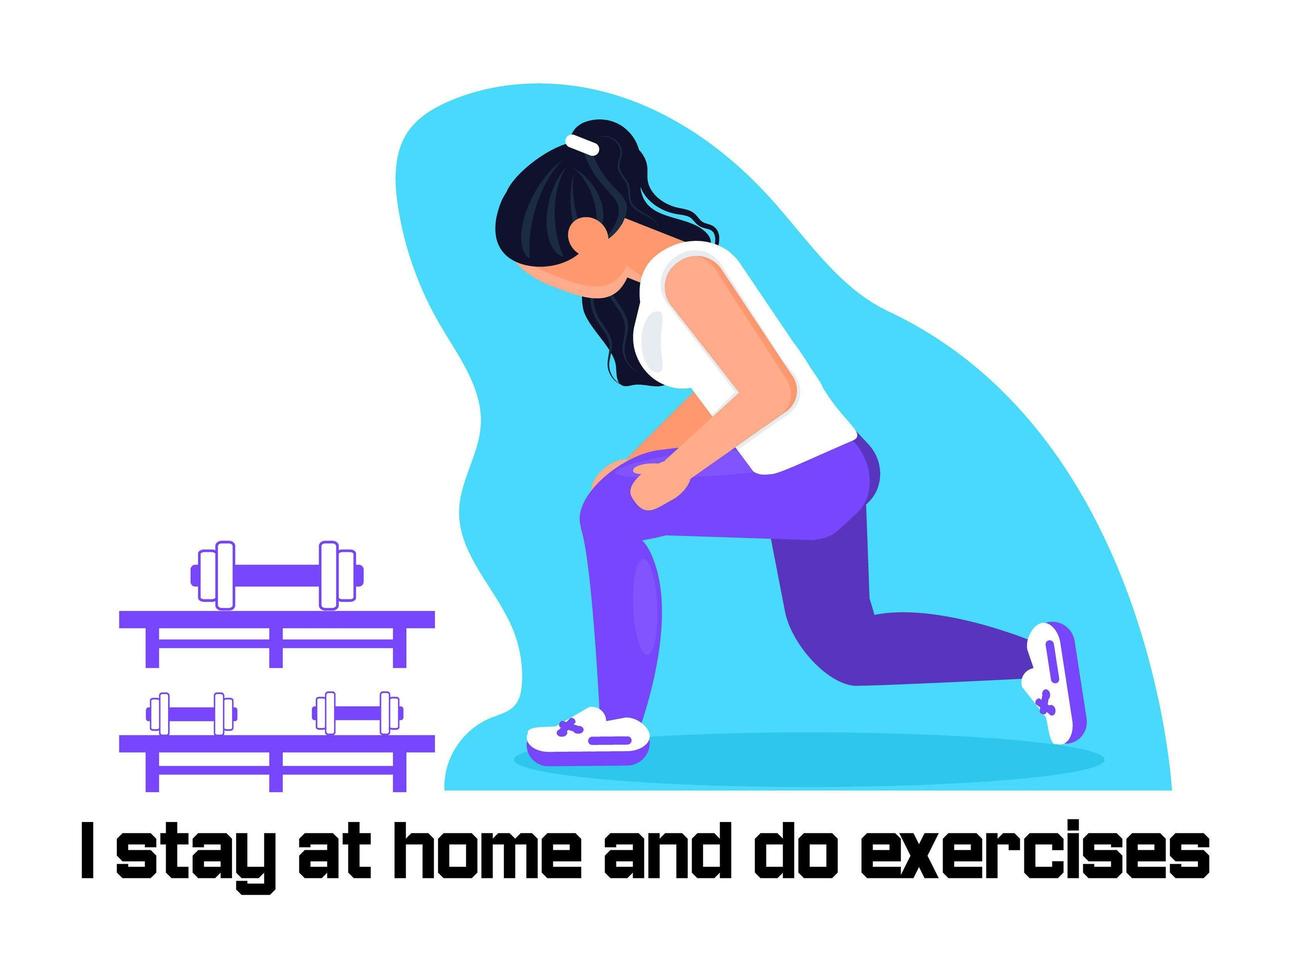 Coronavirus prevention concept vector. Girl does exercises and asks that everybody stays at home. Social campaign and support people vector